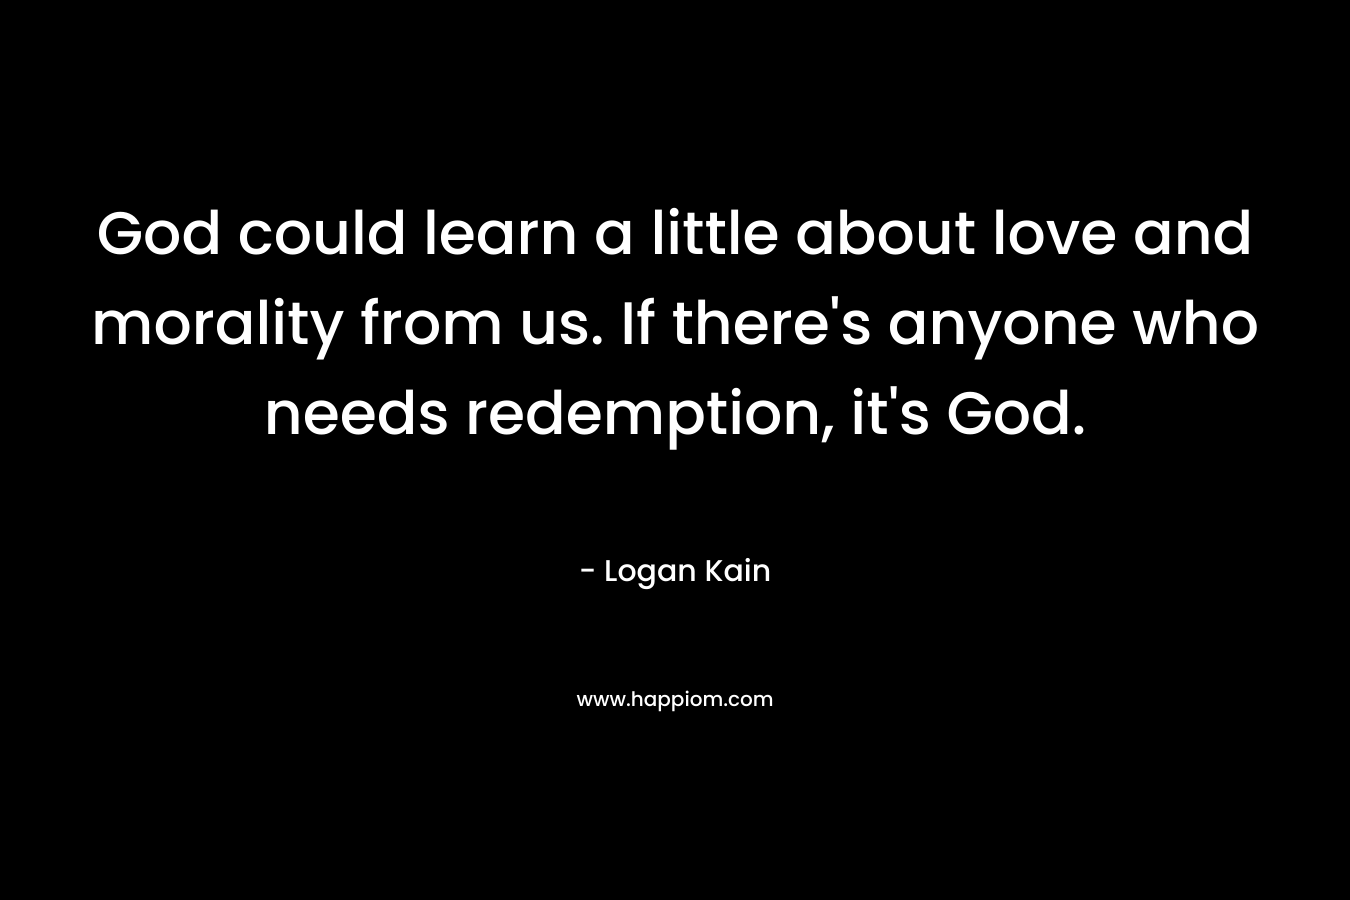 God could learn a little about love and morality from us. If there's anyone who needs redemption, it's God.